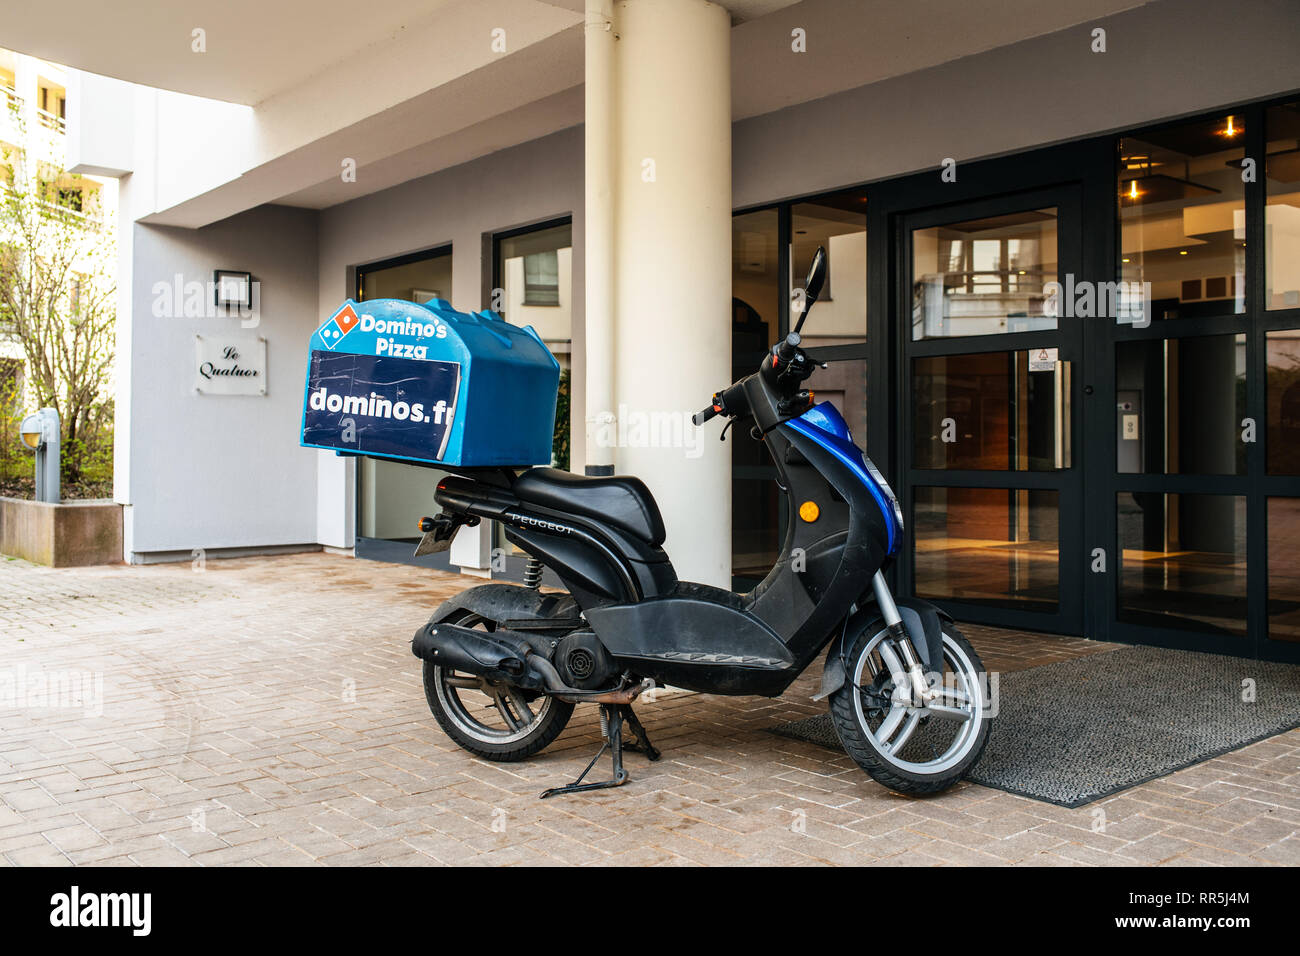 Strasbourg, France - Apr 8, 2018: Pizza delivery scooter parked in front of the apartment building entrance with large DOMINO inscription on the storage compartment Stock Photo